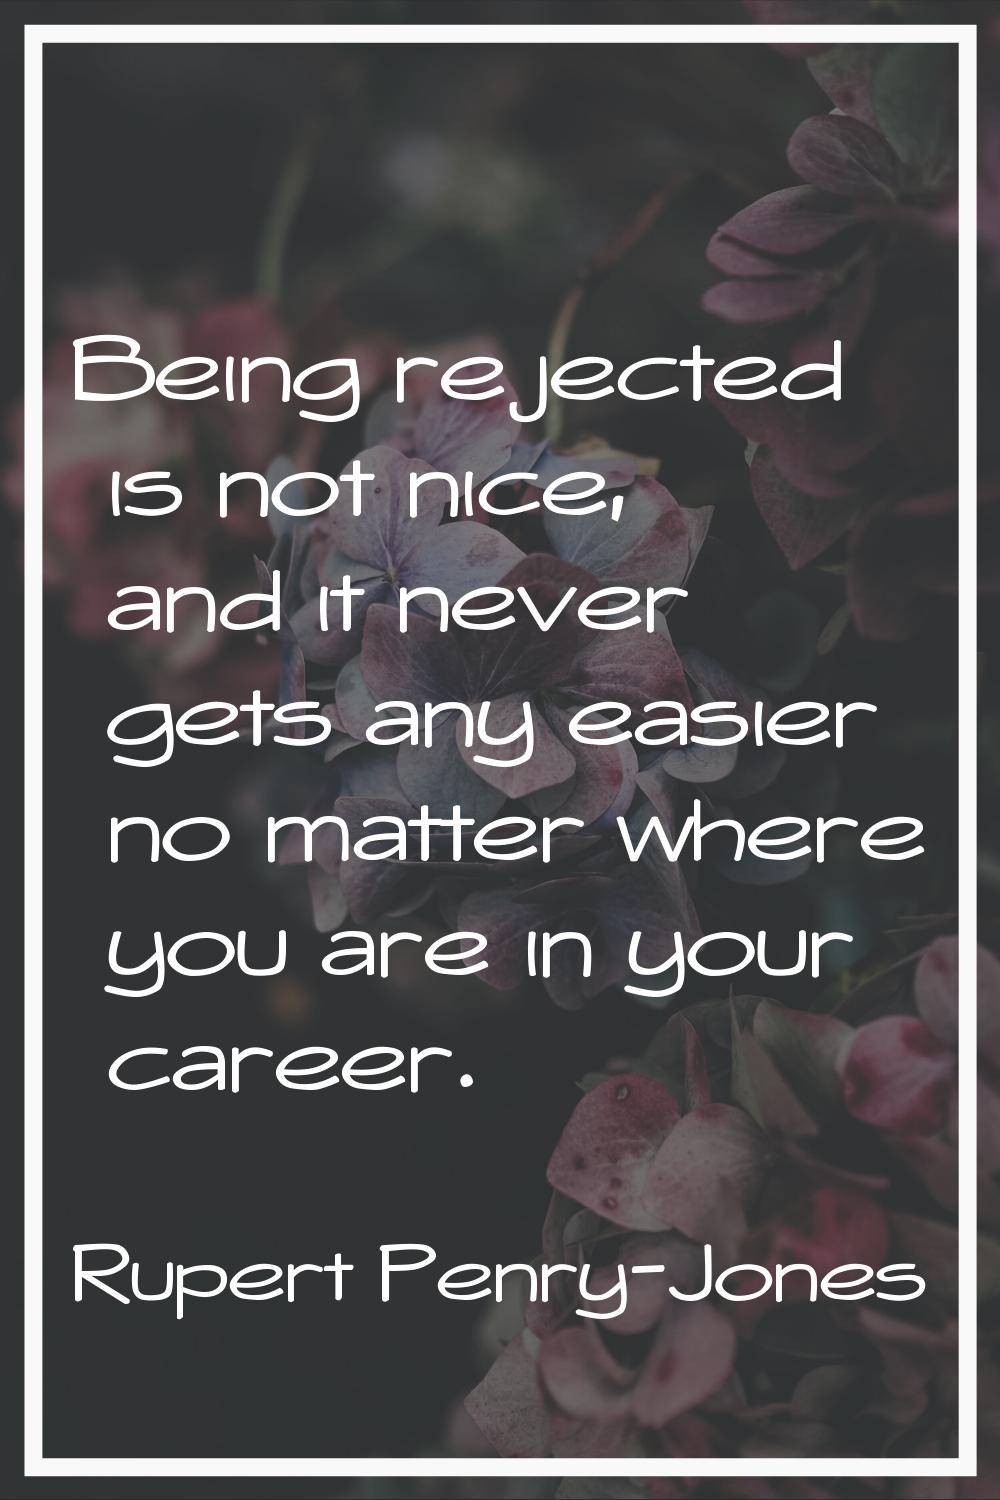 Being rejected is not nice, and it never gets any easier no matter where you are in your career.